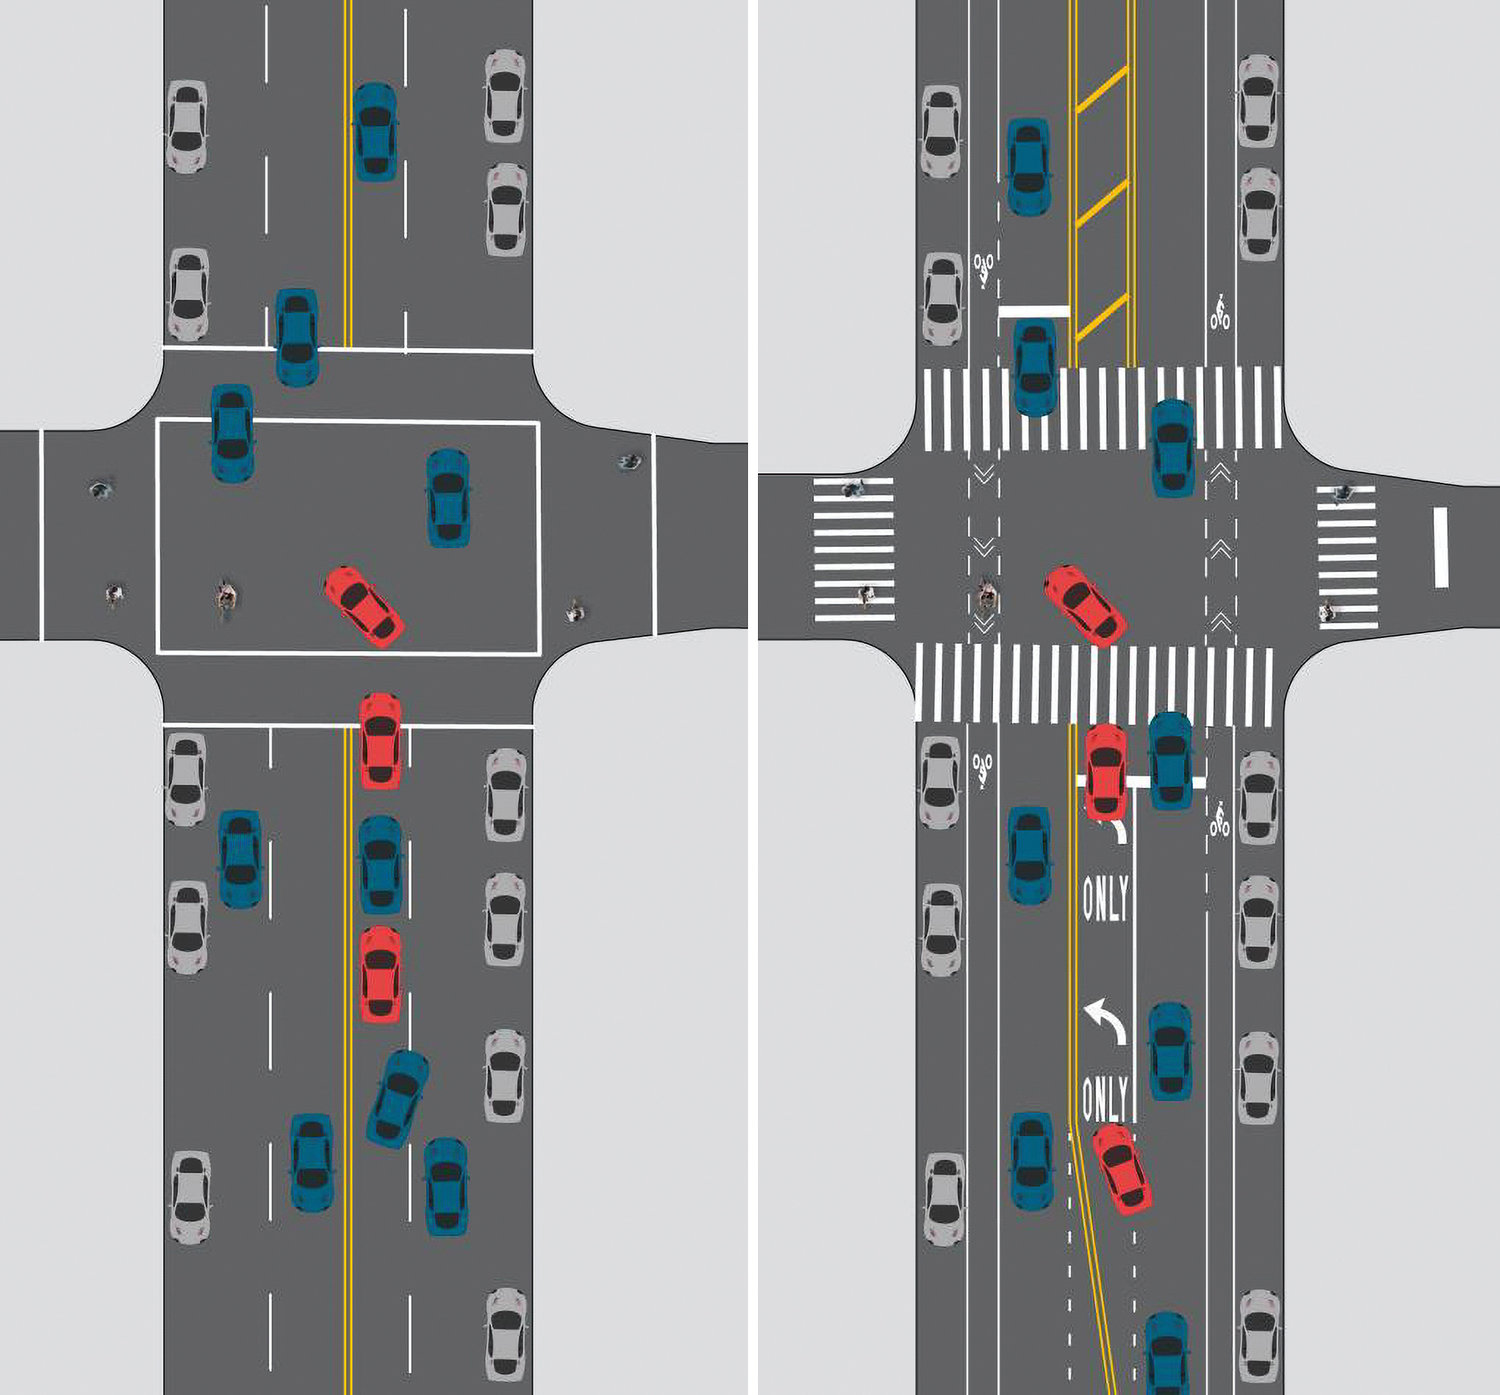 A diagram, left, shows the current status of Riverdale Avenue. There are two travel lanes in both directions, north and south, allowing drivers to make left-hand turns. The right diagram is the proposed plan for the narrowed roadway, planned for late summer or early fall. The city’s transportation department plans to narrow Riverdale Avenue from four travel lanes to three, while adding bicycle lanes on both sides despite opposition from Community Board 8.